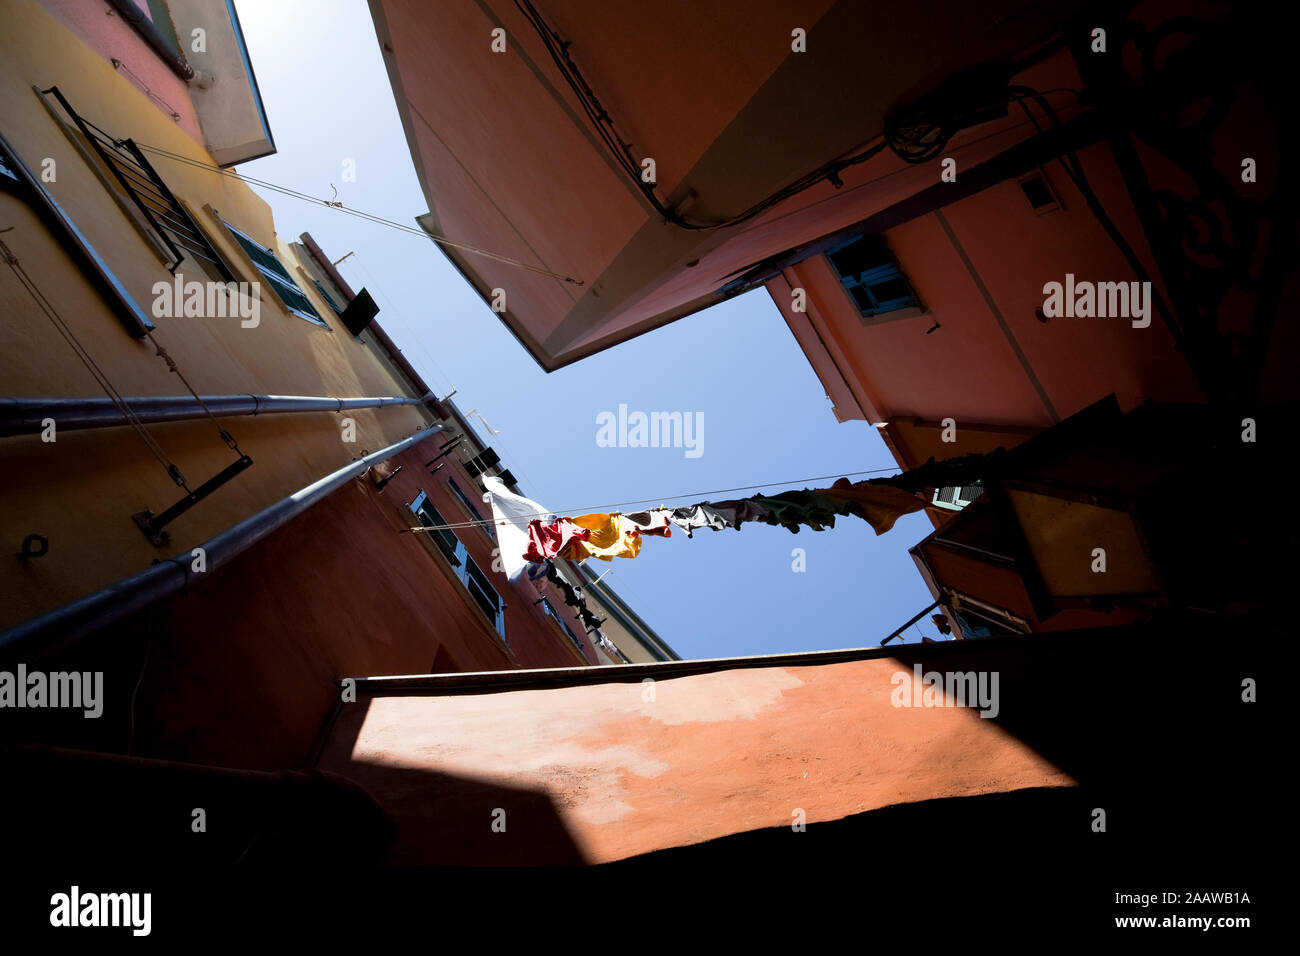 Worm's eye view of laundry hanging out to dry in Manarola, Cinque Terre, Italy Stock Photo